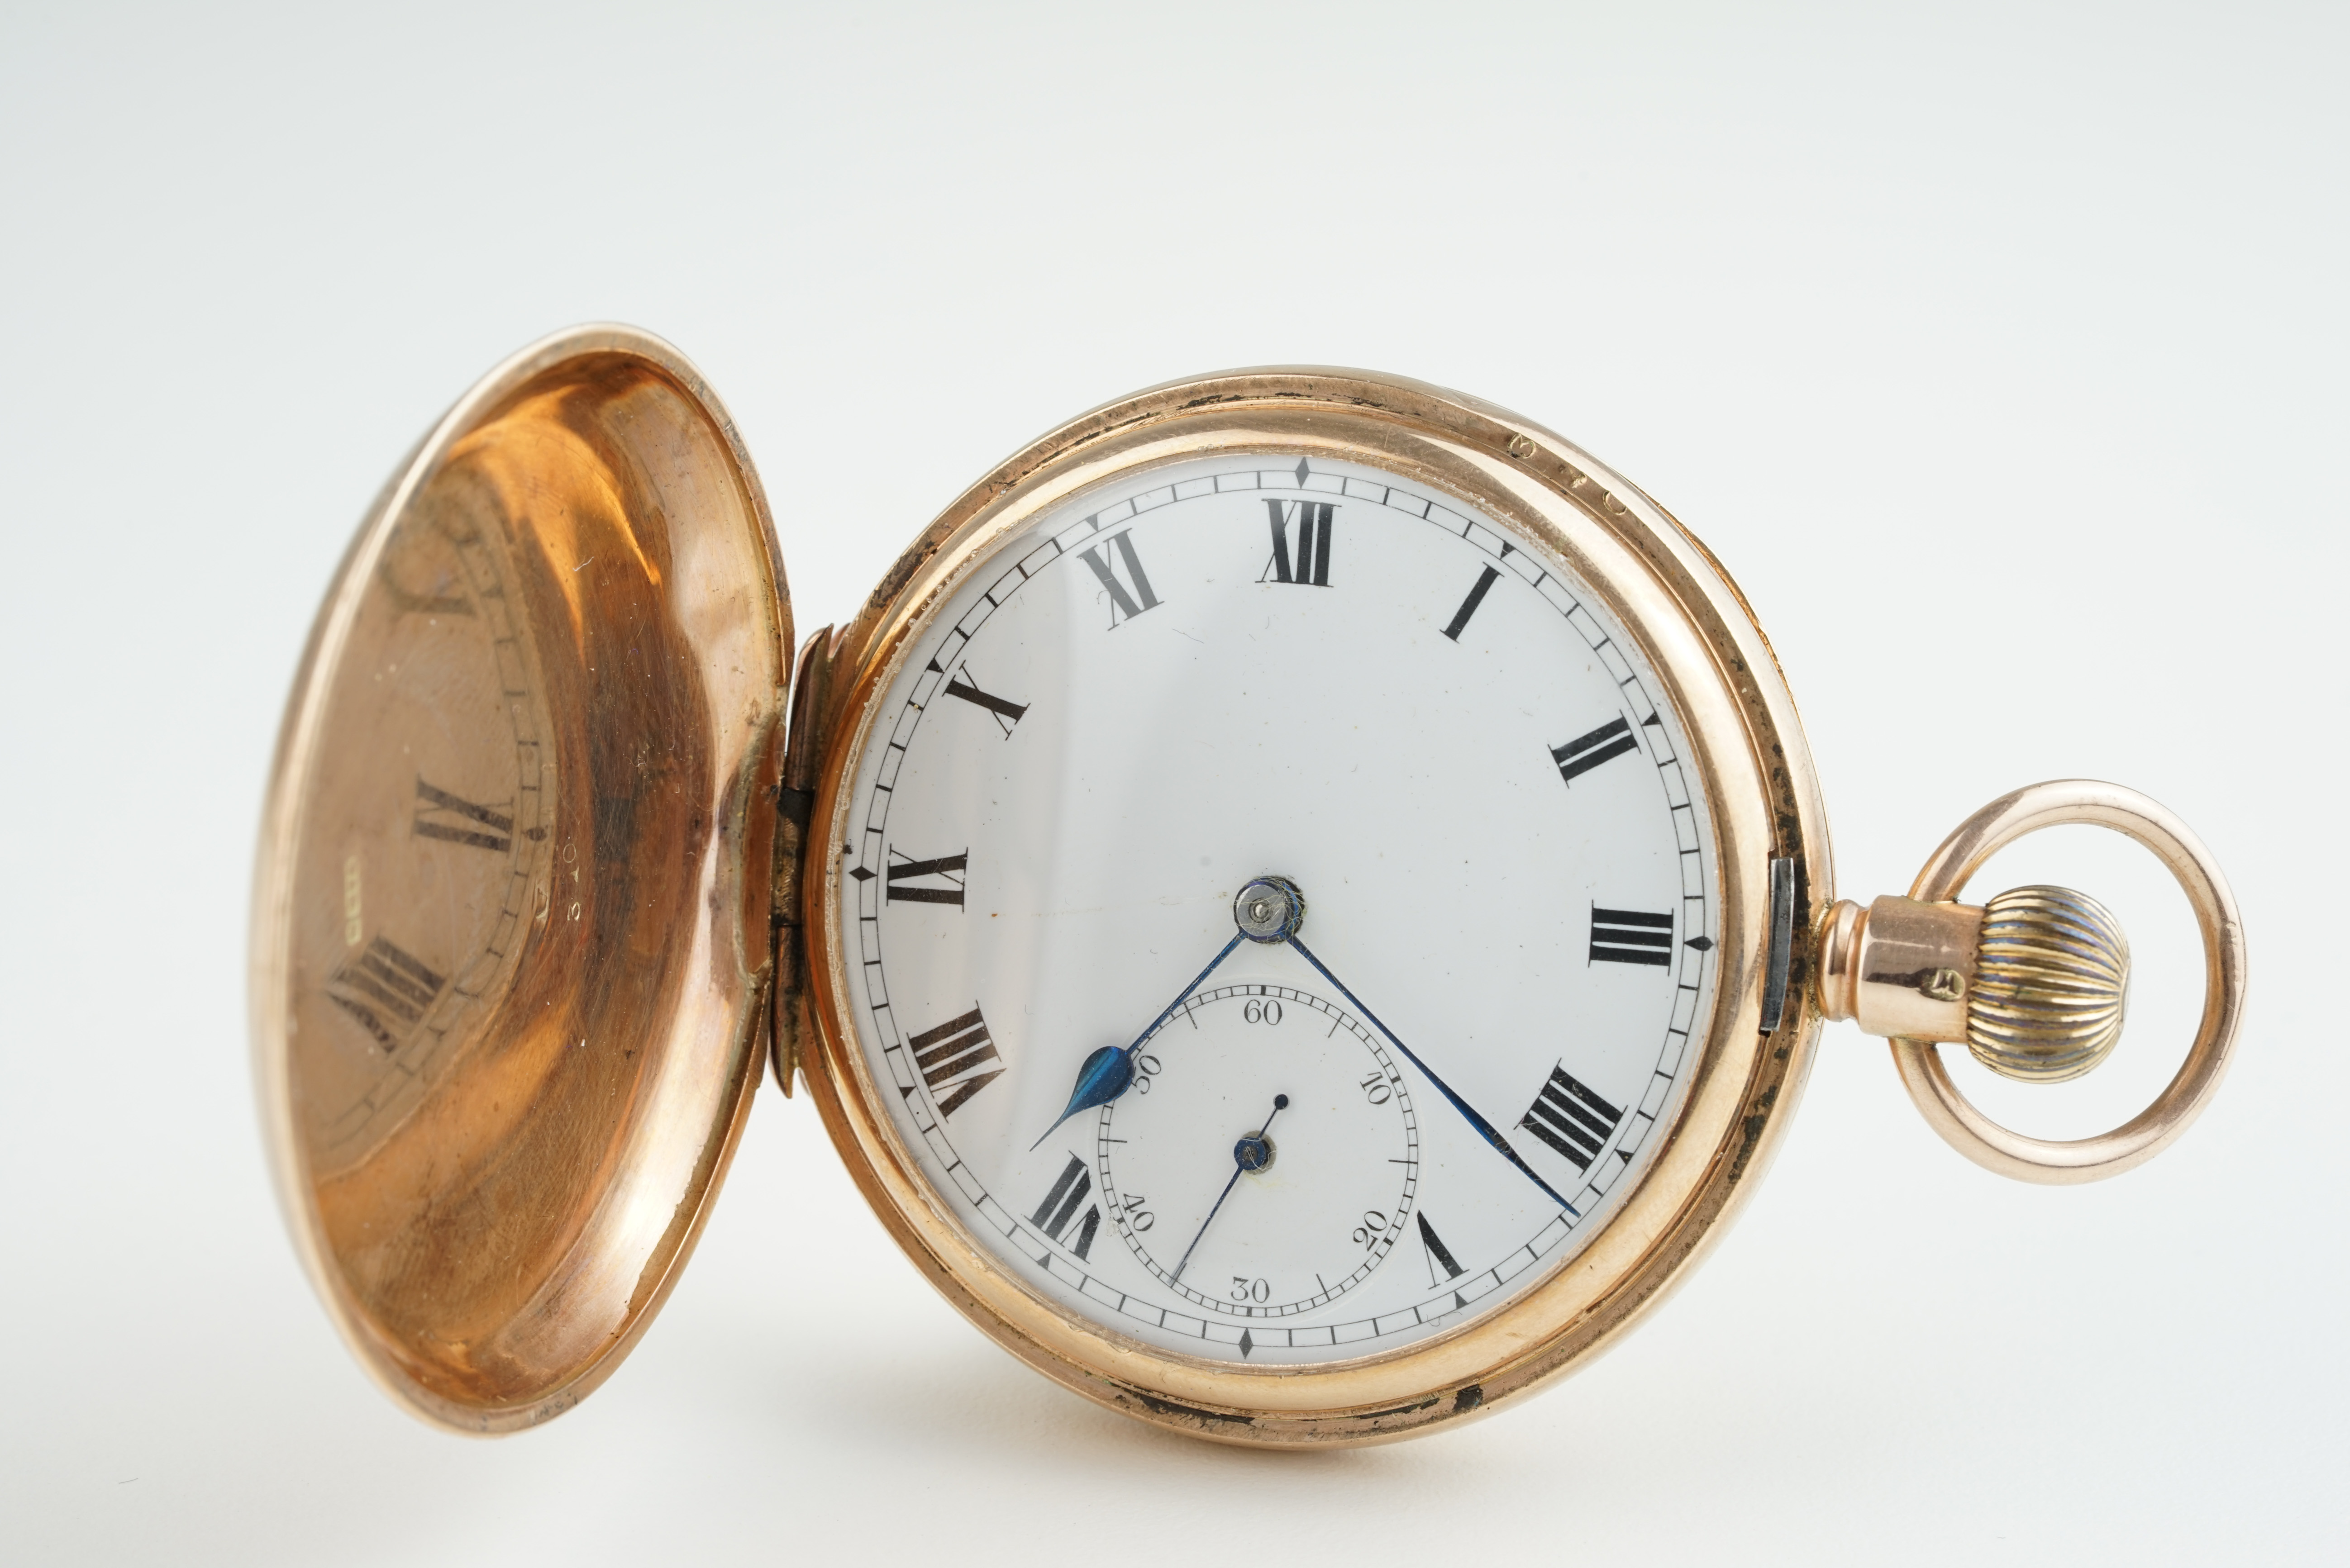 ANTIQUE 9CT ROSE GOLD POCKET WATCH, circular white dial with hour markers and hands, 49mm 9ct rose - Image 2 of 2